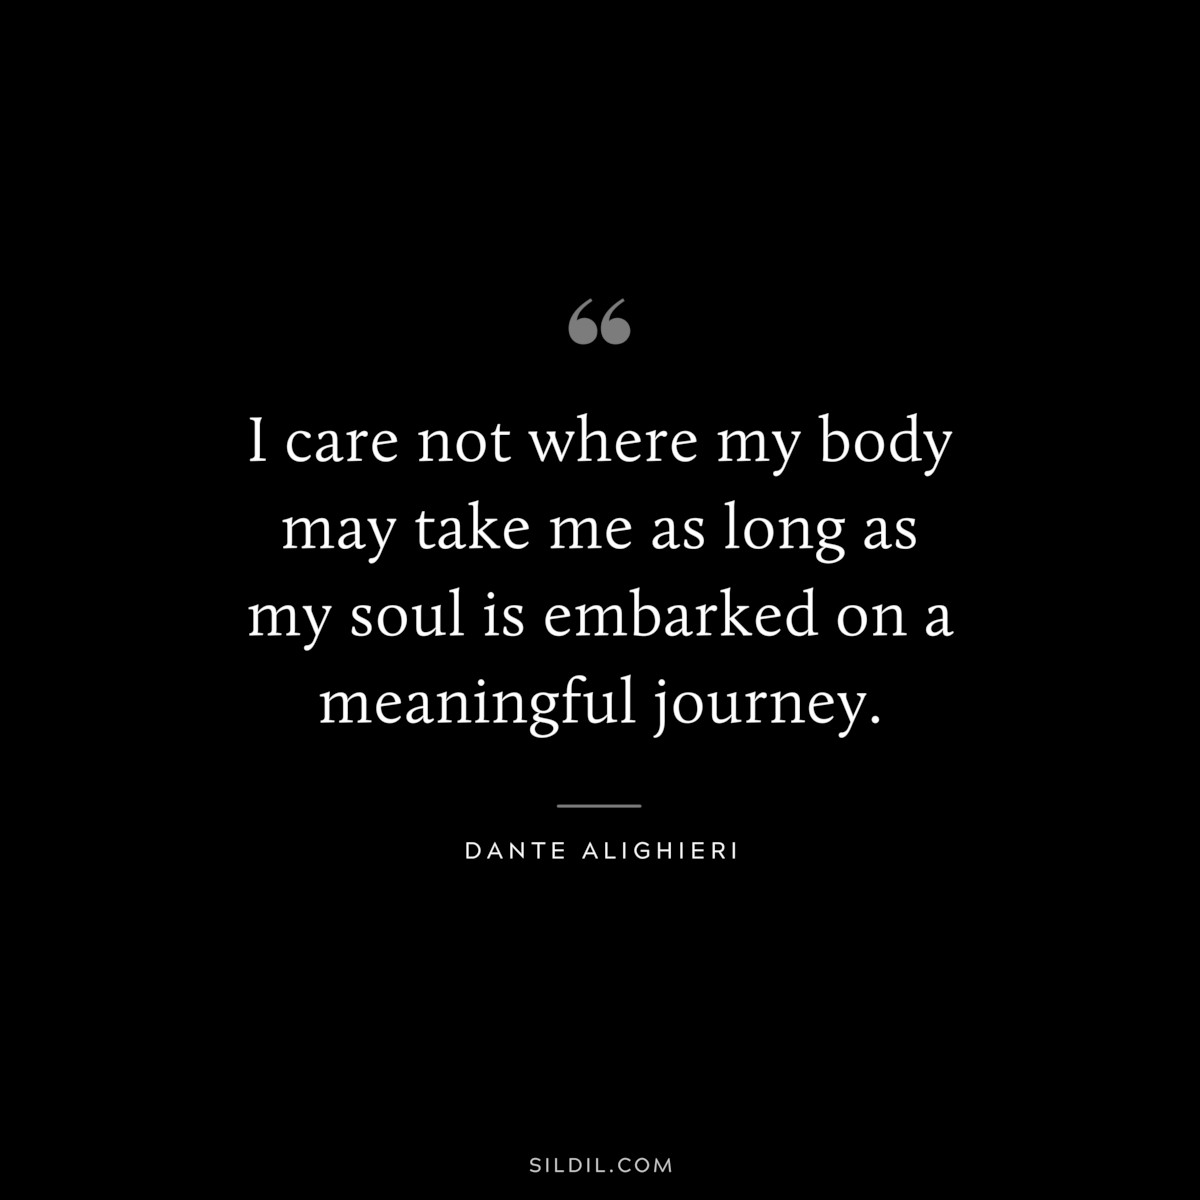 I care not where my body may take me as long as my soul is embarked on a meaningful journey. ― Dante Alighieri